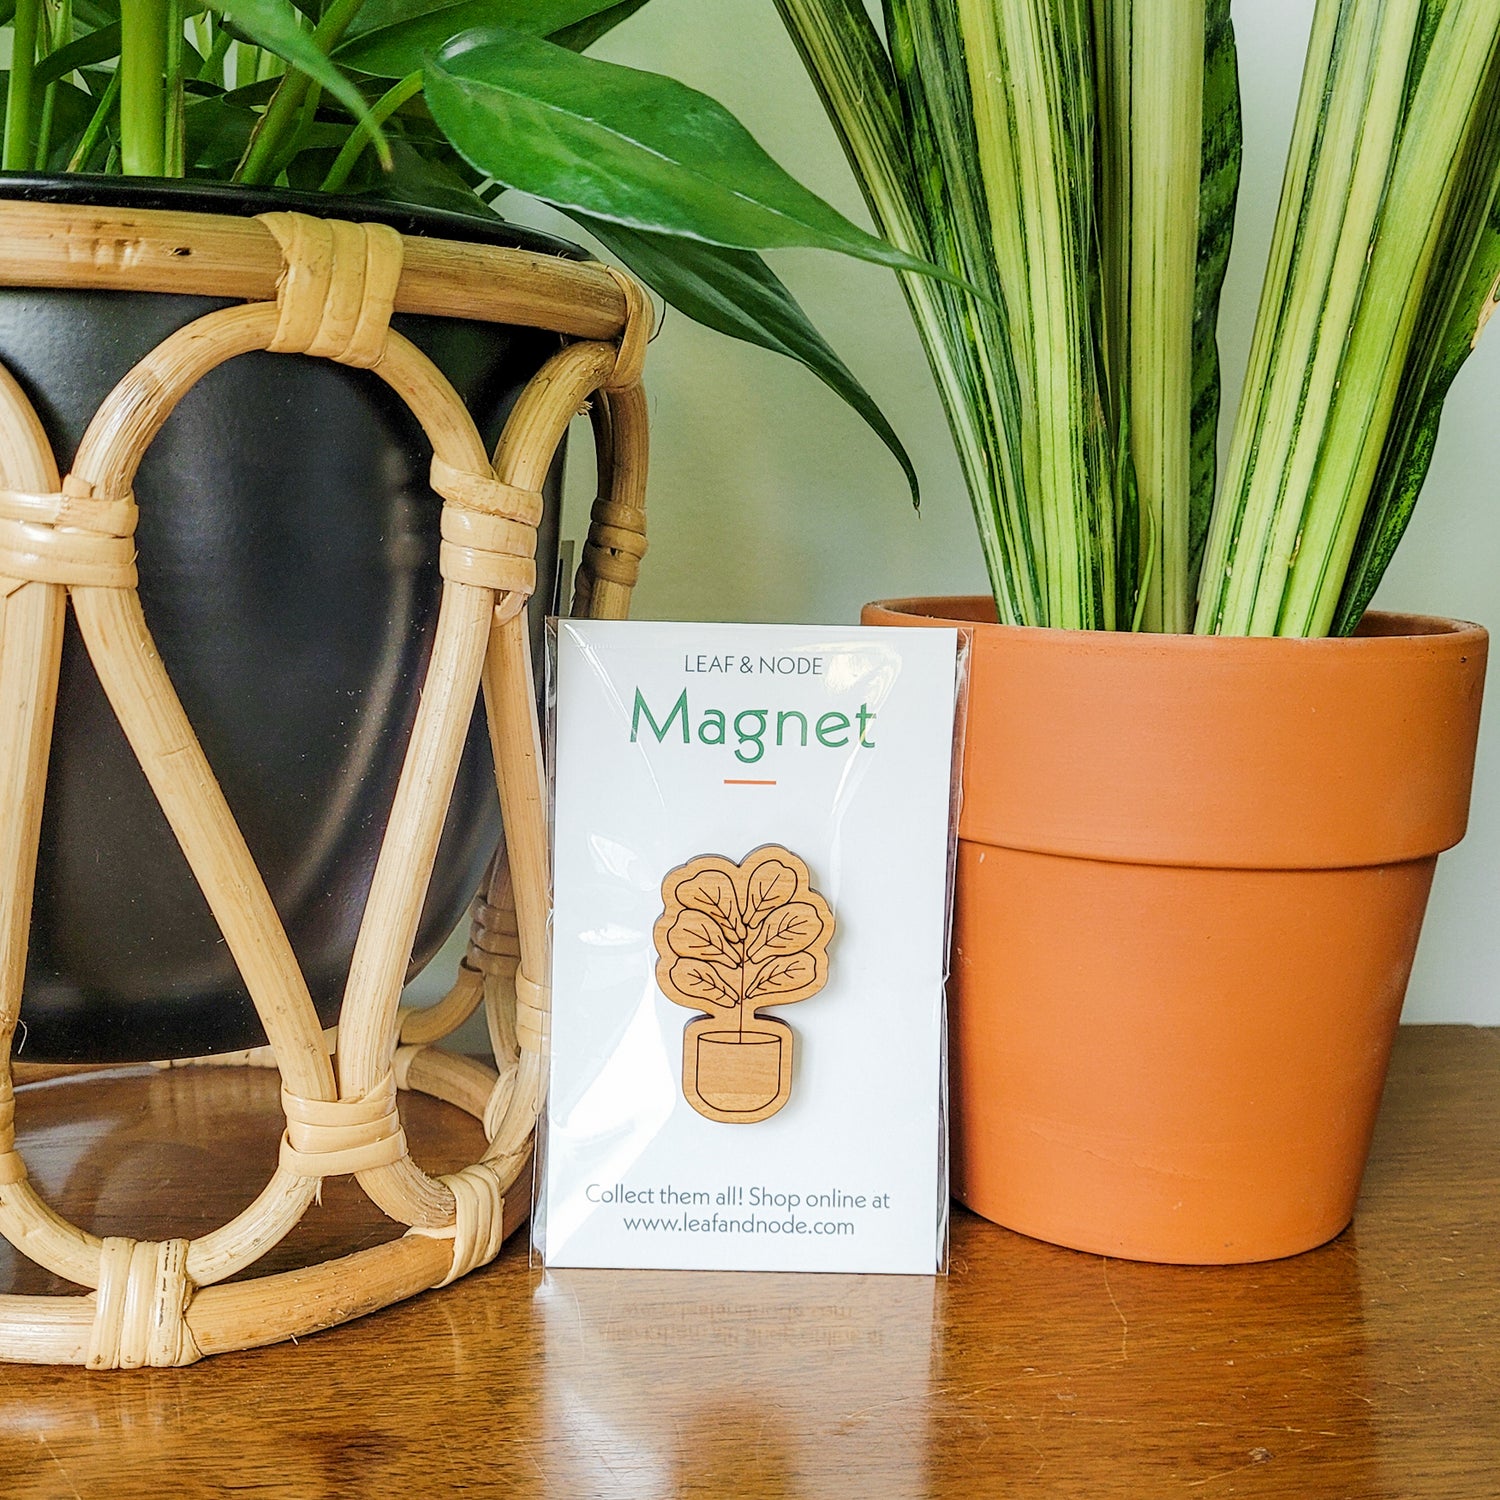 Handcrafted magnet featuring a fiddle leaf fig plant engraved in cherry wood in product packaging sitting on an end table with two houseplants.